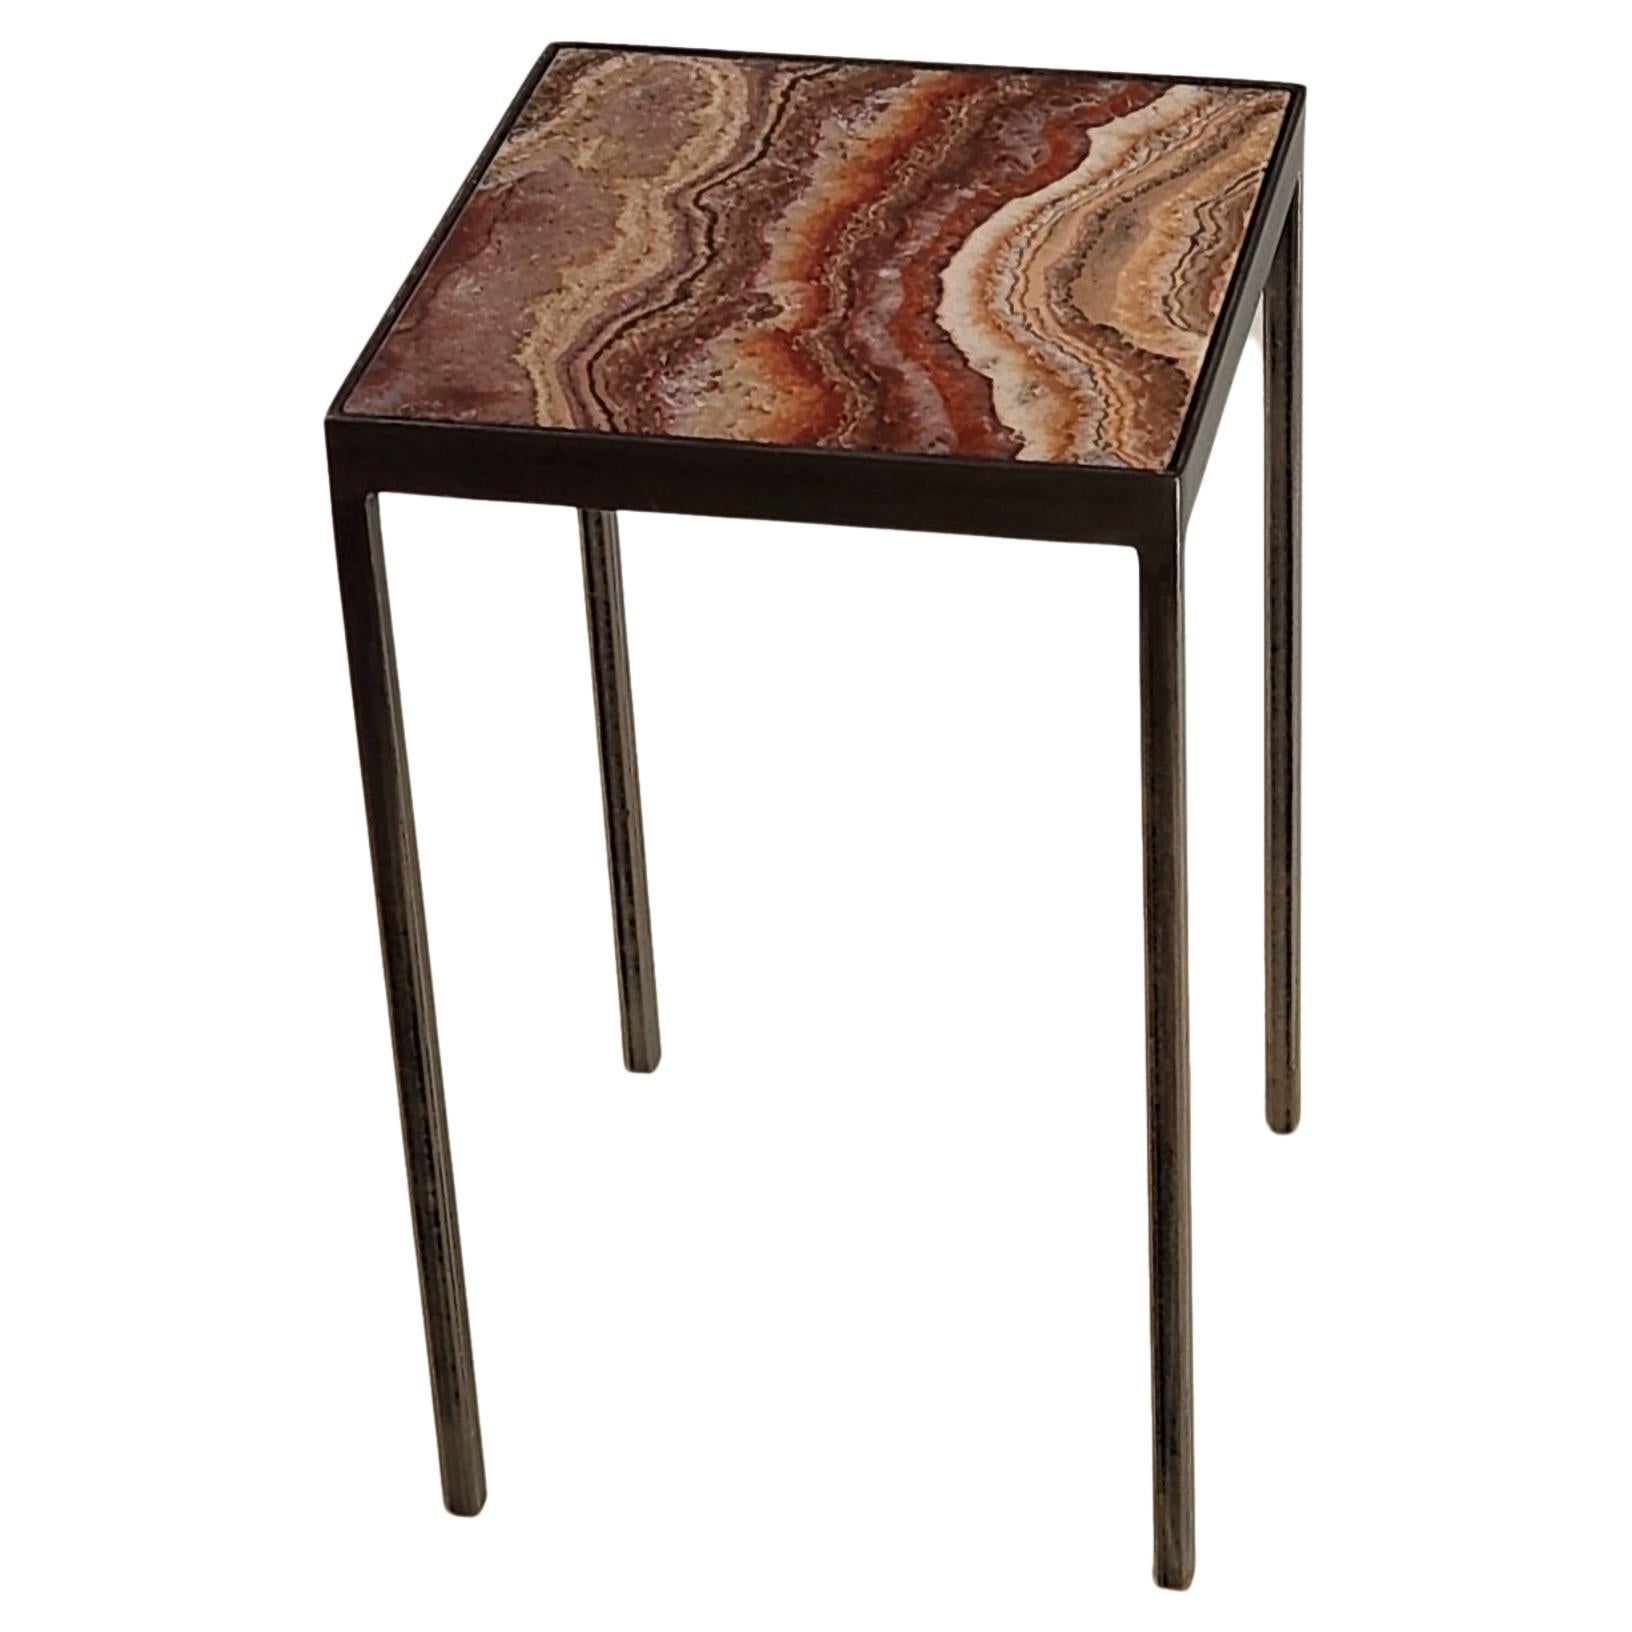 Elegant Side Table with an Onyx Tile by Gueridon Designs For Sale